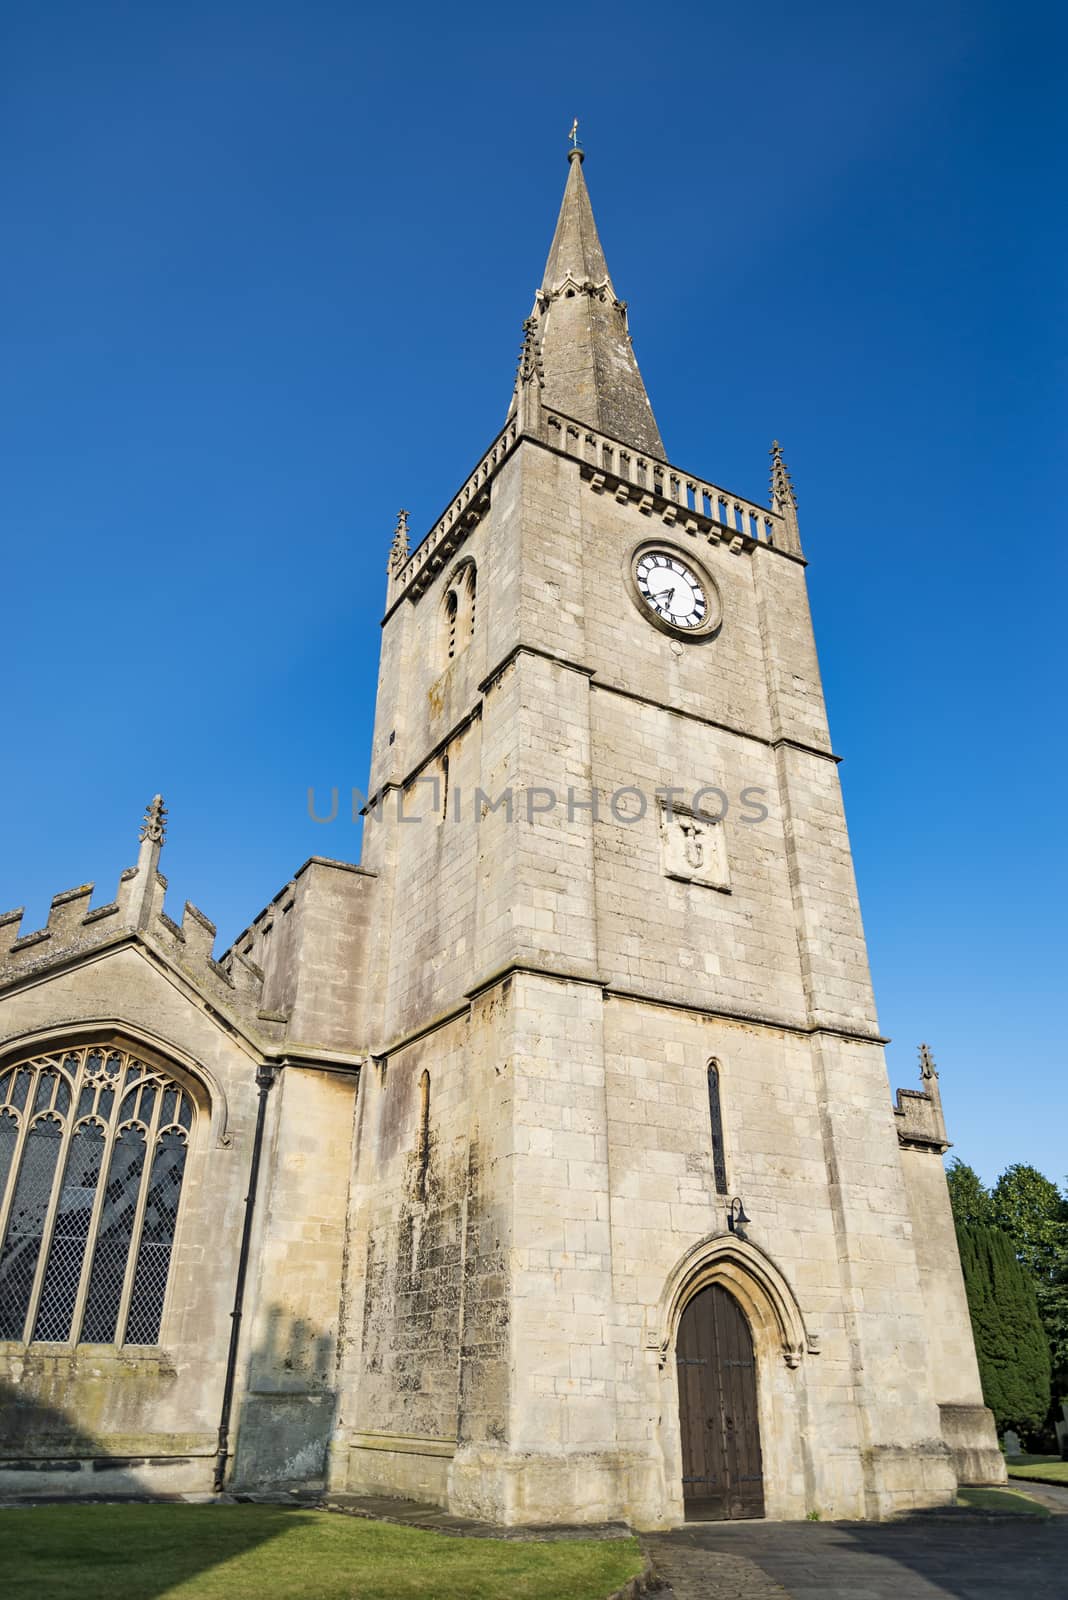 The old St. Andrews Church in Chippenham, Wiltshire, England UK